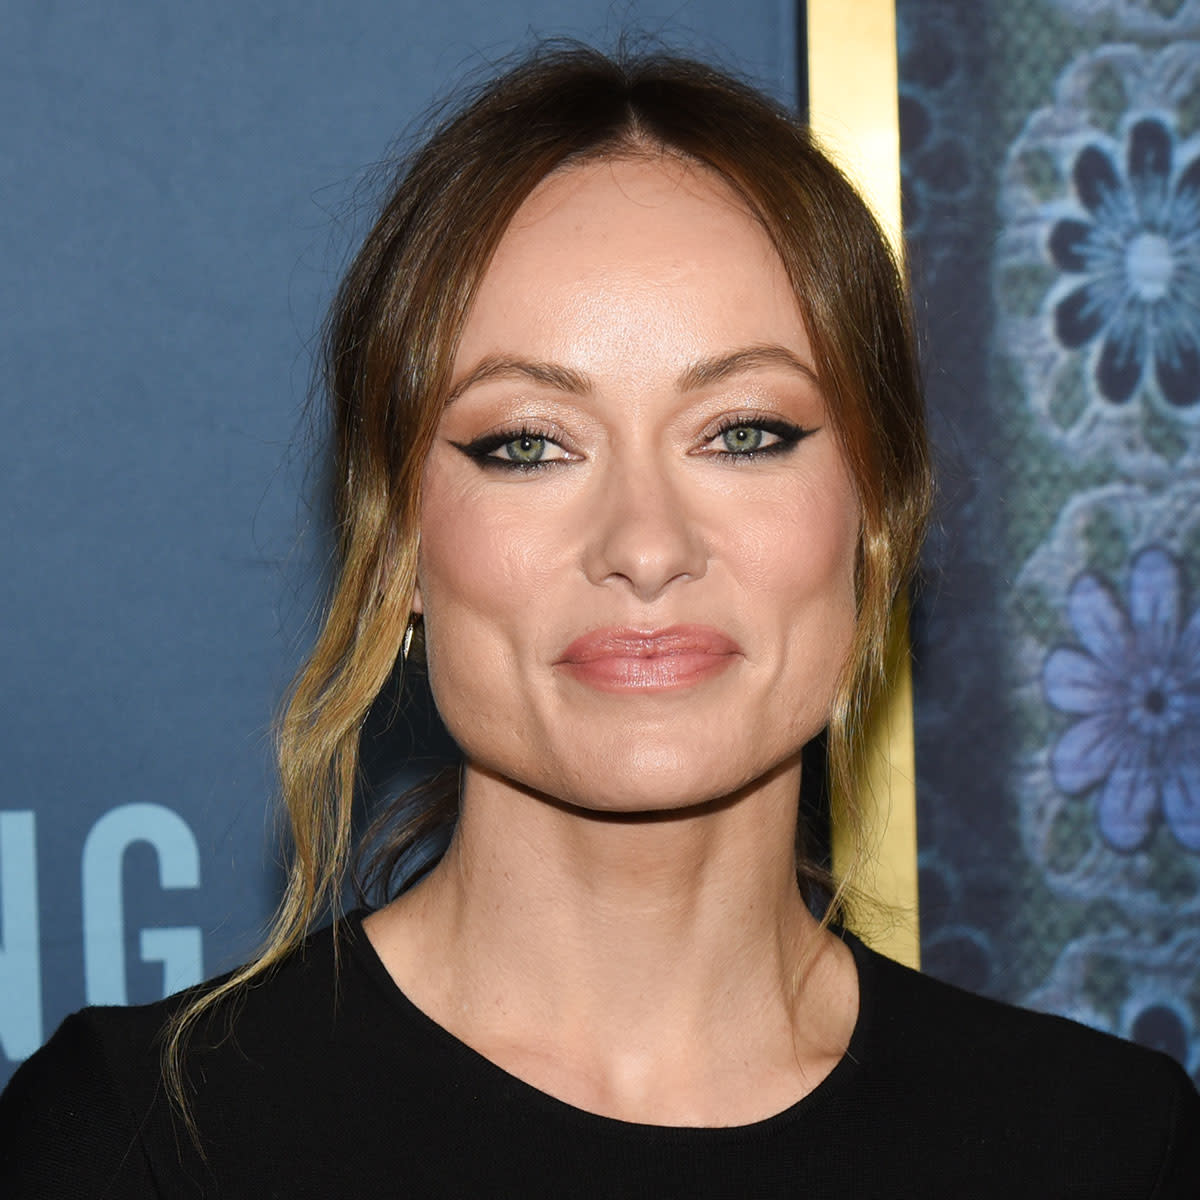 Olivia Wilde at the Los Angeles premiere of 'Women Talking'